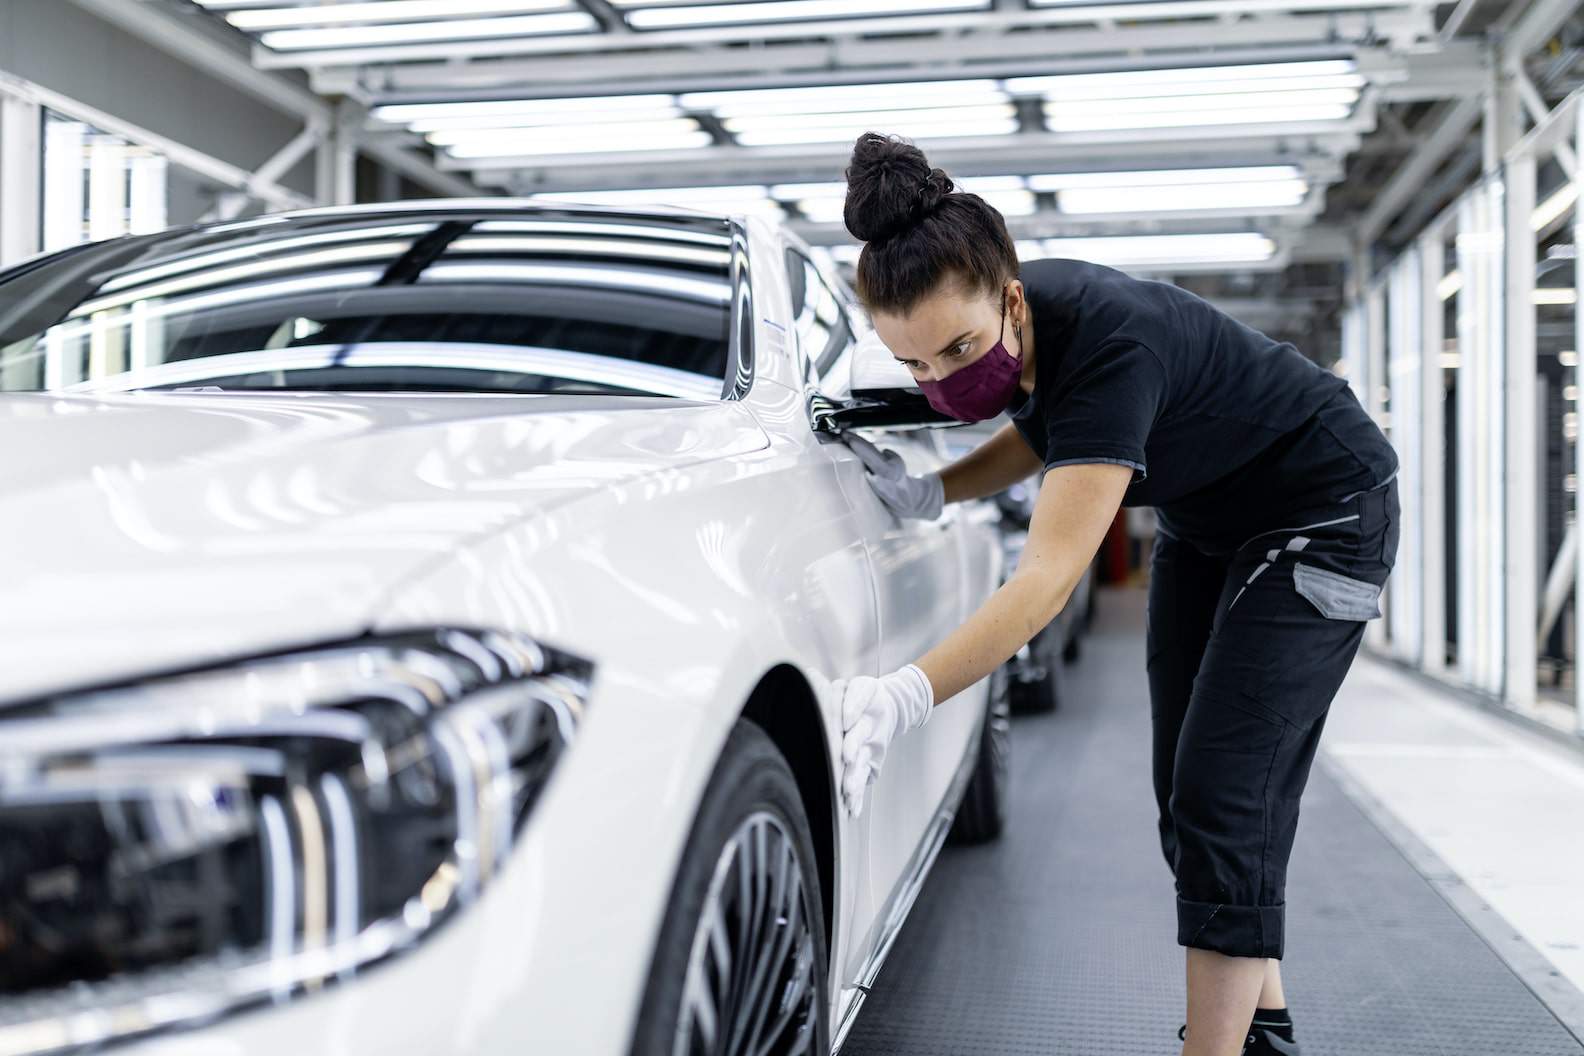 Mercedes-Benz announces the opening of Factory 56